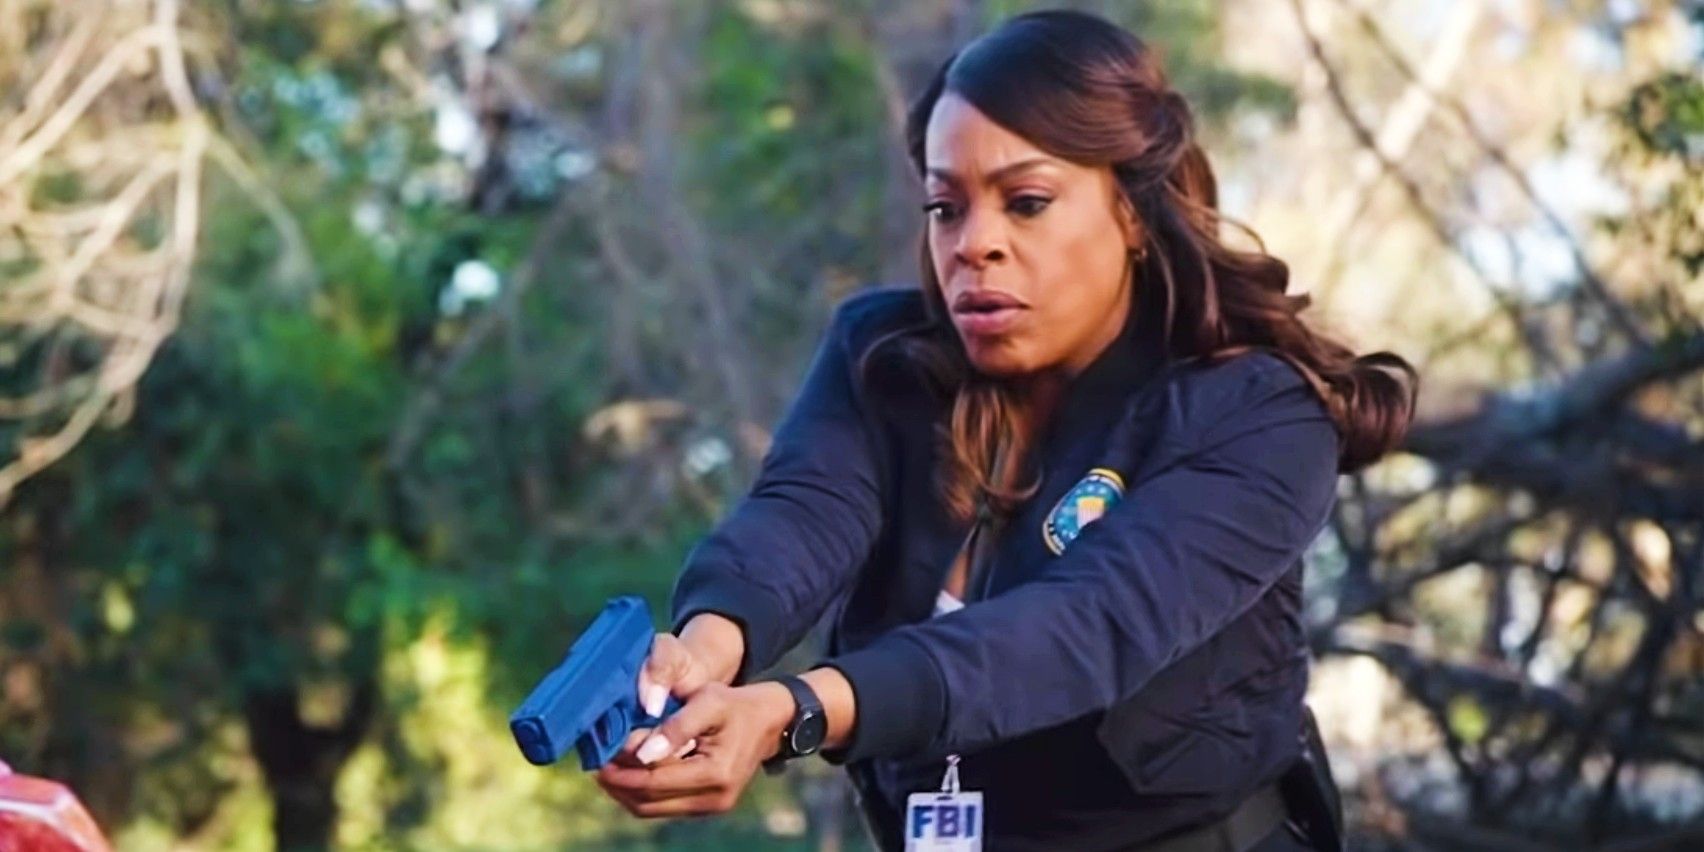 The Rookie: Feds Spinoff Starring Niecy Nash-Betts Confirmed by ABC